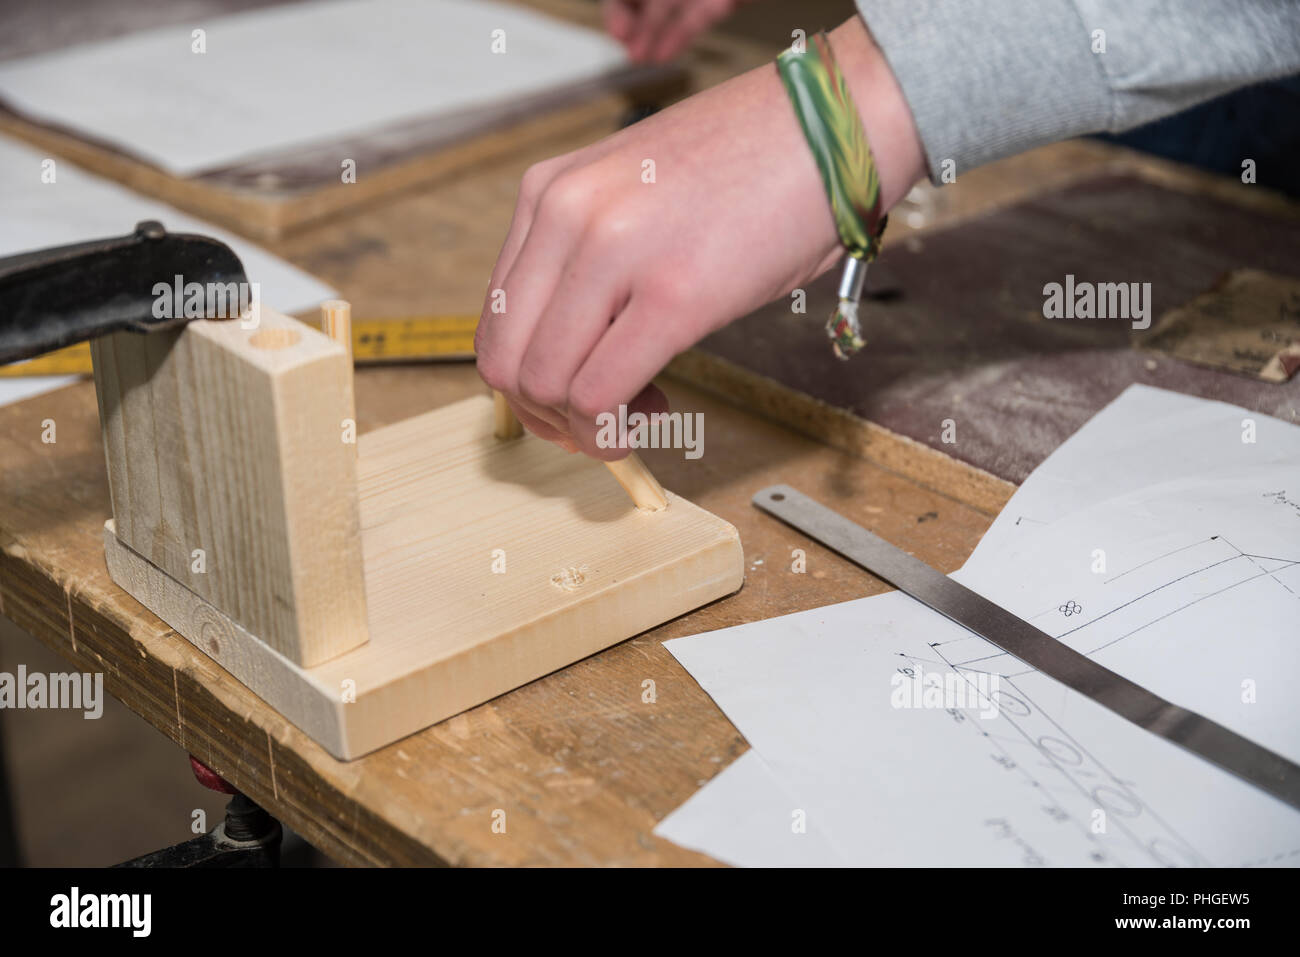 Joiner constructs wood joints - close-up Stock Photo